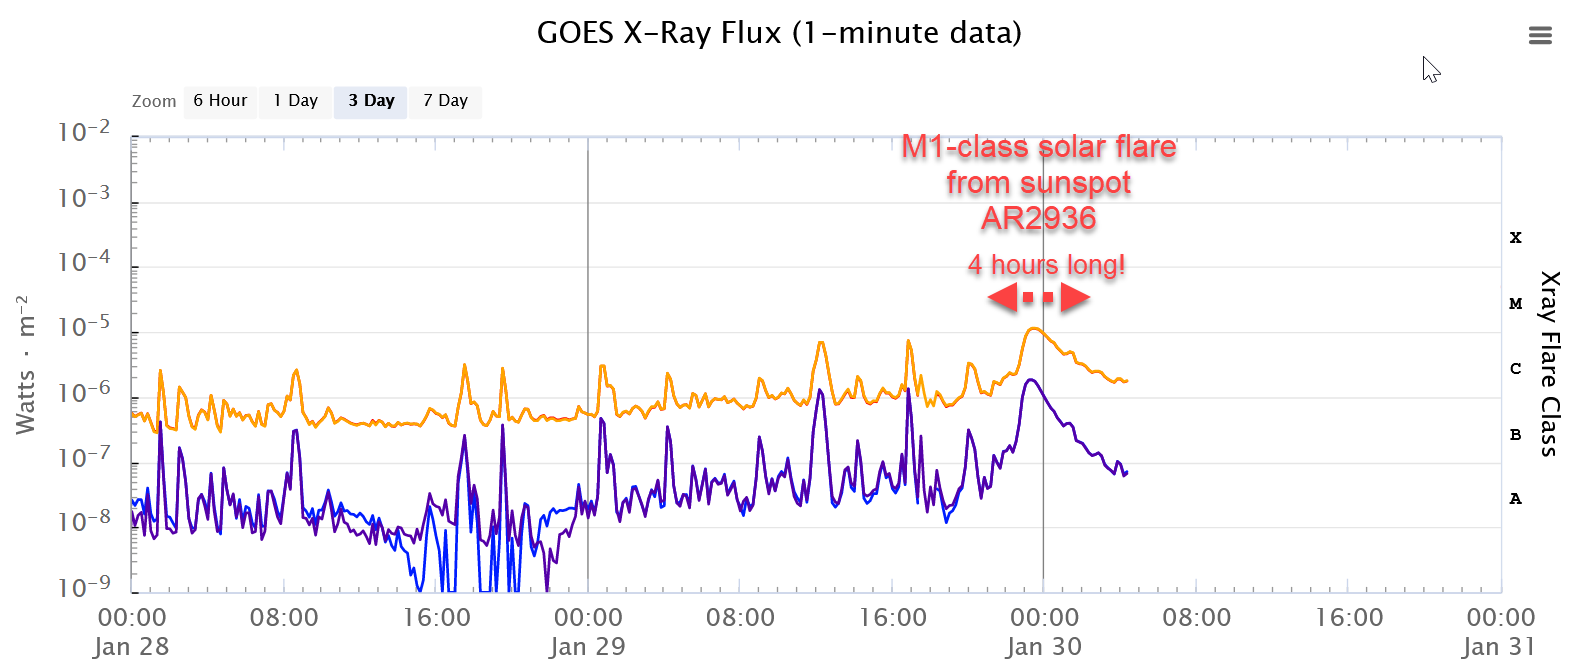 X-ray flux from the flare according to GOES satellite data. Credit: GOES / NASA